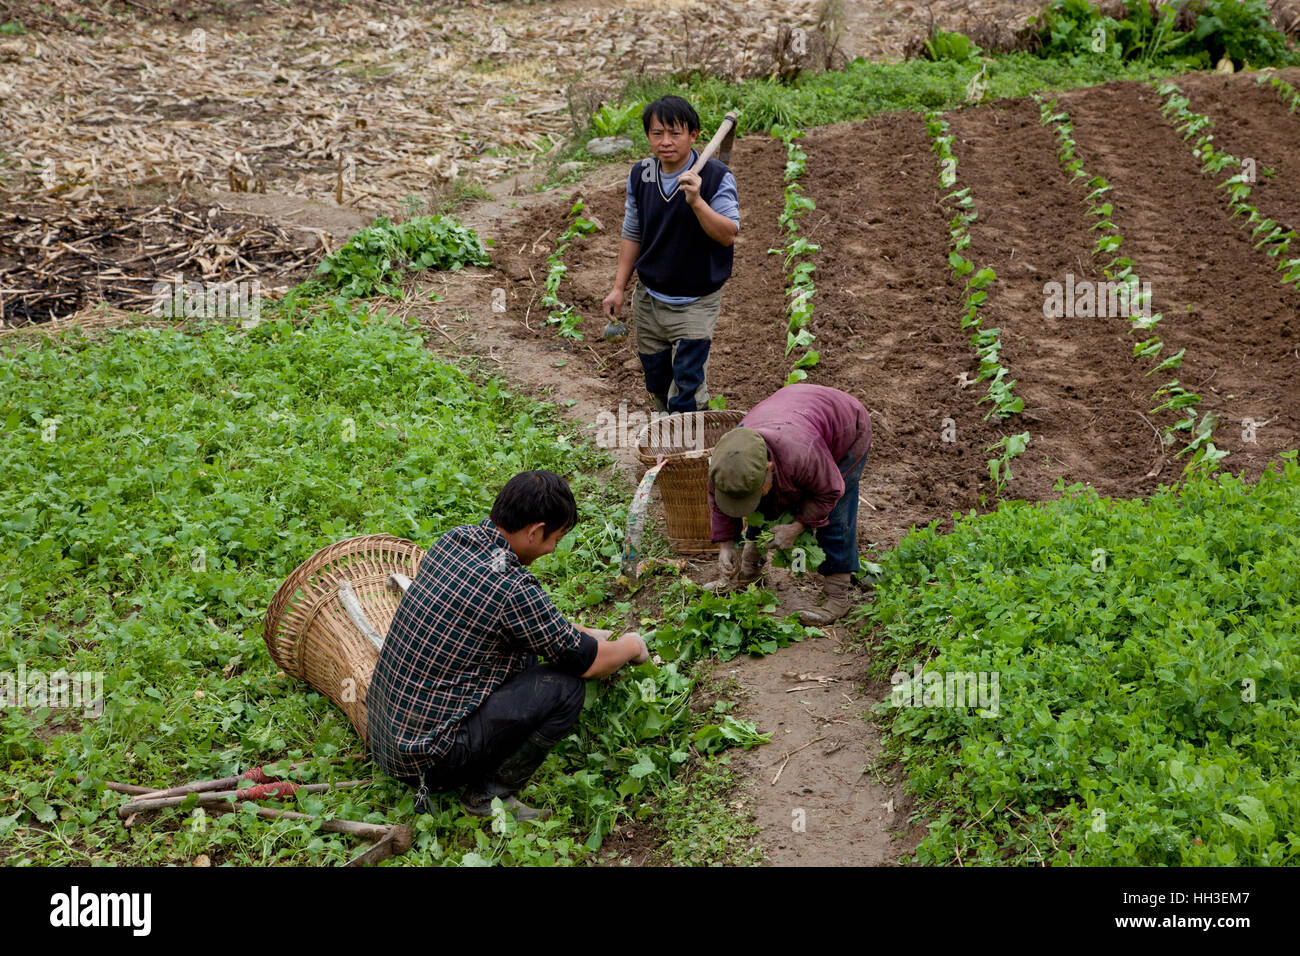 Farmers work in their fields in a small village in west China. Stock Photo